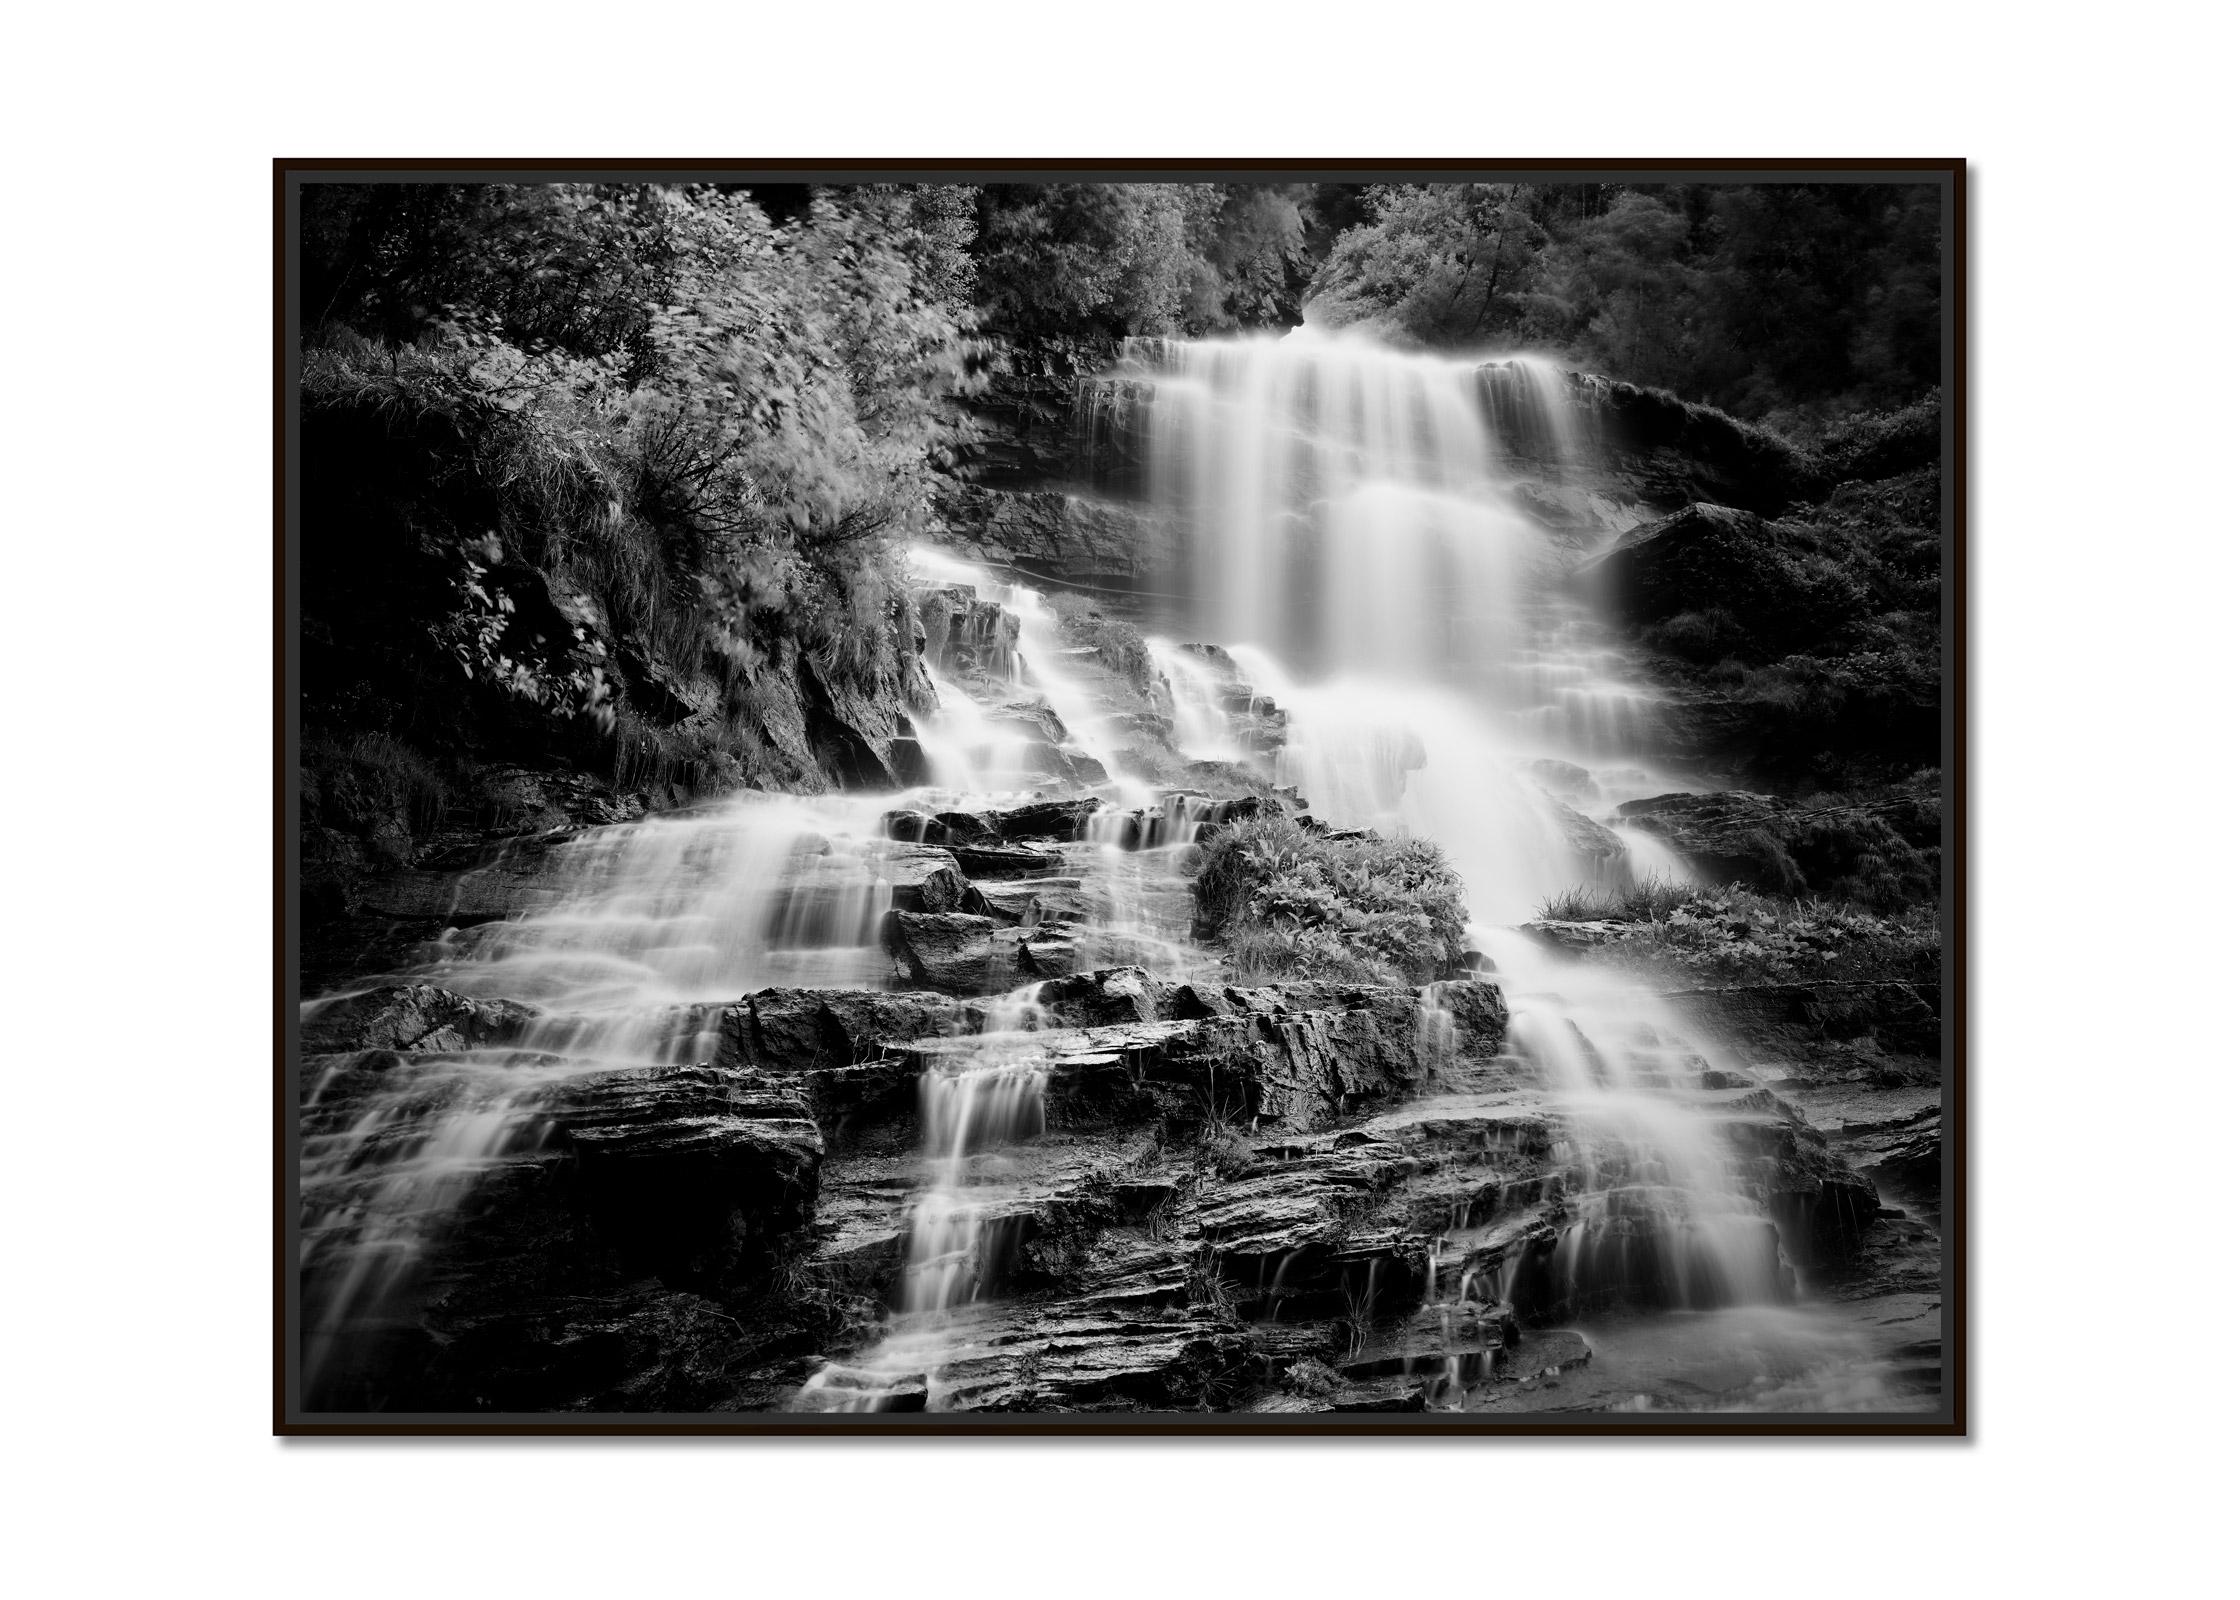 Klockelefall, Waterfall, Mountain stream, black and white photography, landscape - Photograph by Gerald Berghammer